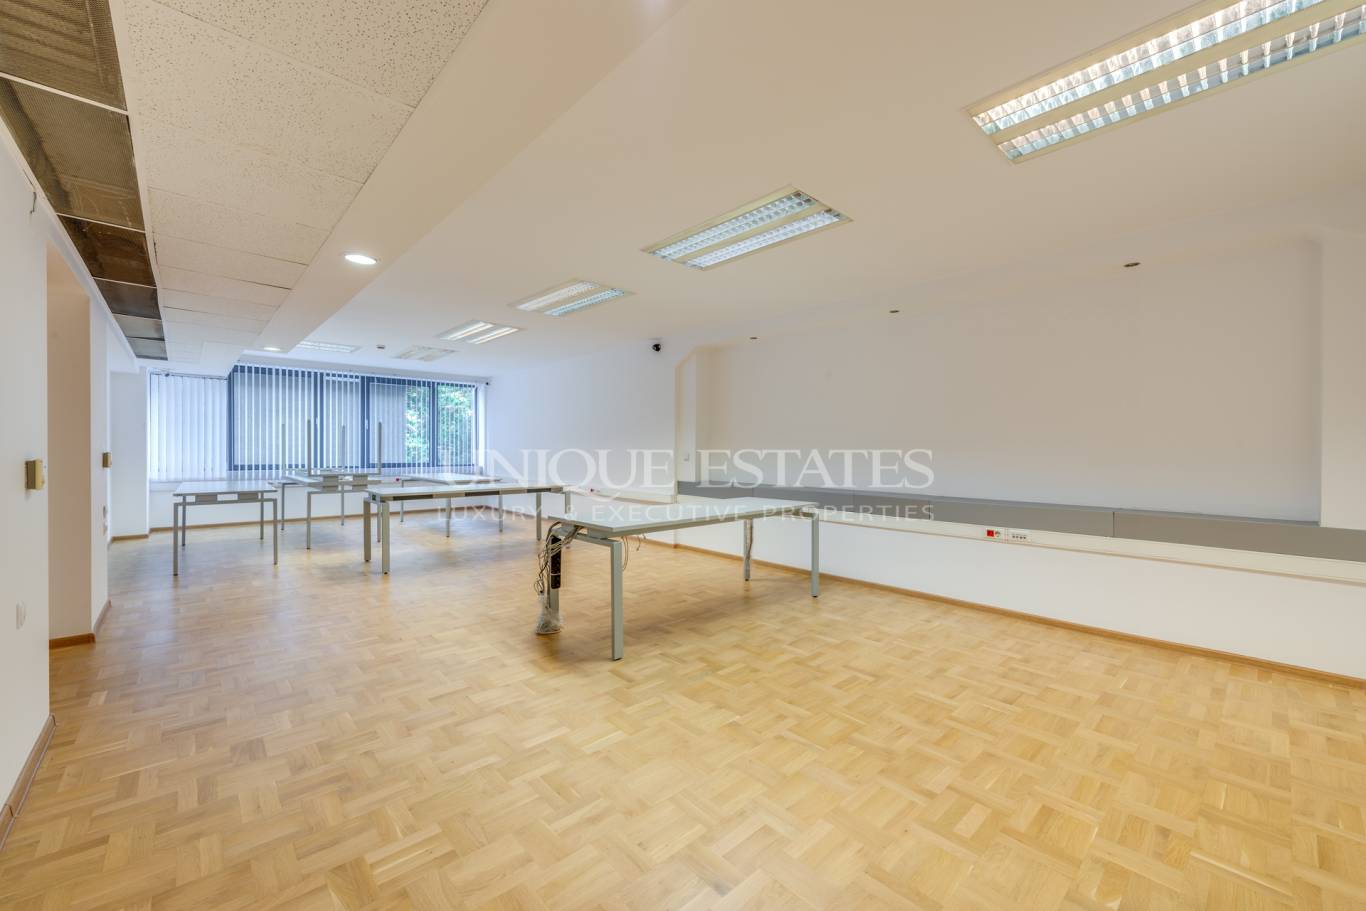 Office for rent in Sofia, Downtown with listing ID: K14005 - image 4